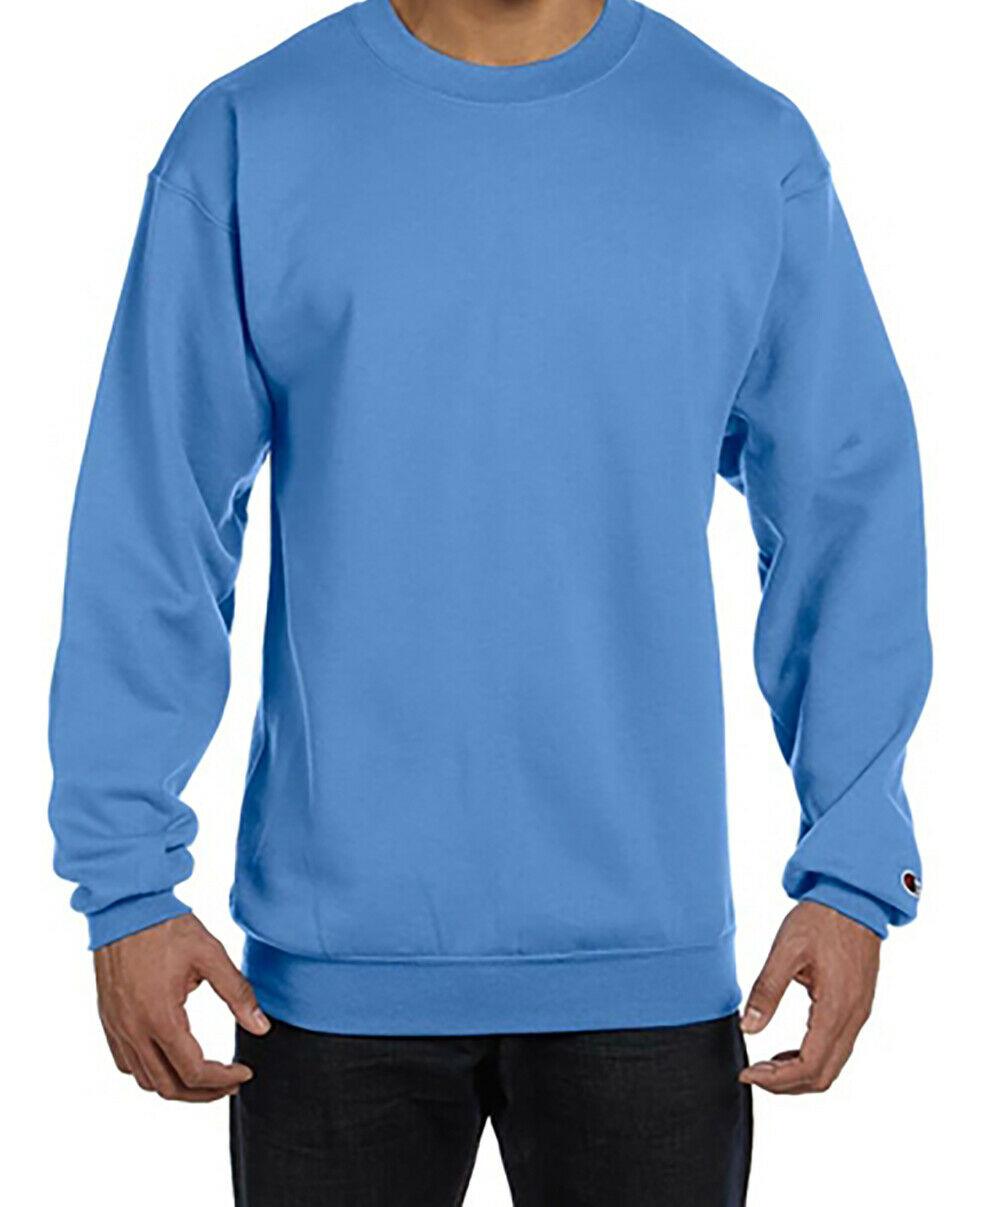 Champion Eco Authentic S600 Double Dry Action Fleece Crew Light Blue Size 3XL - SVNYFancy